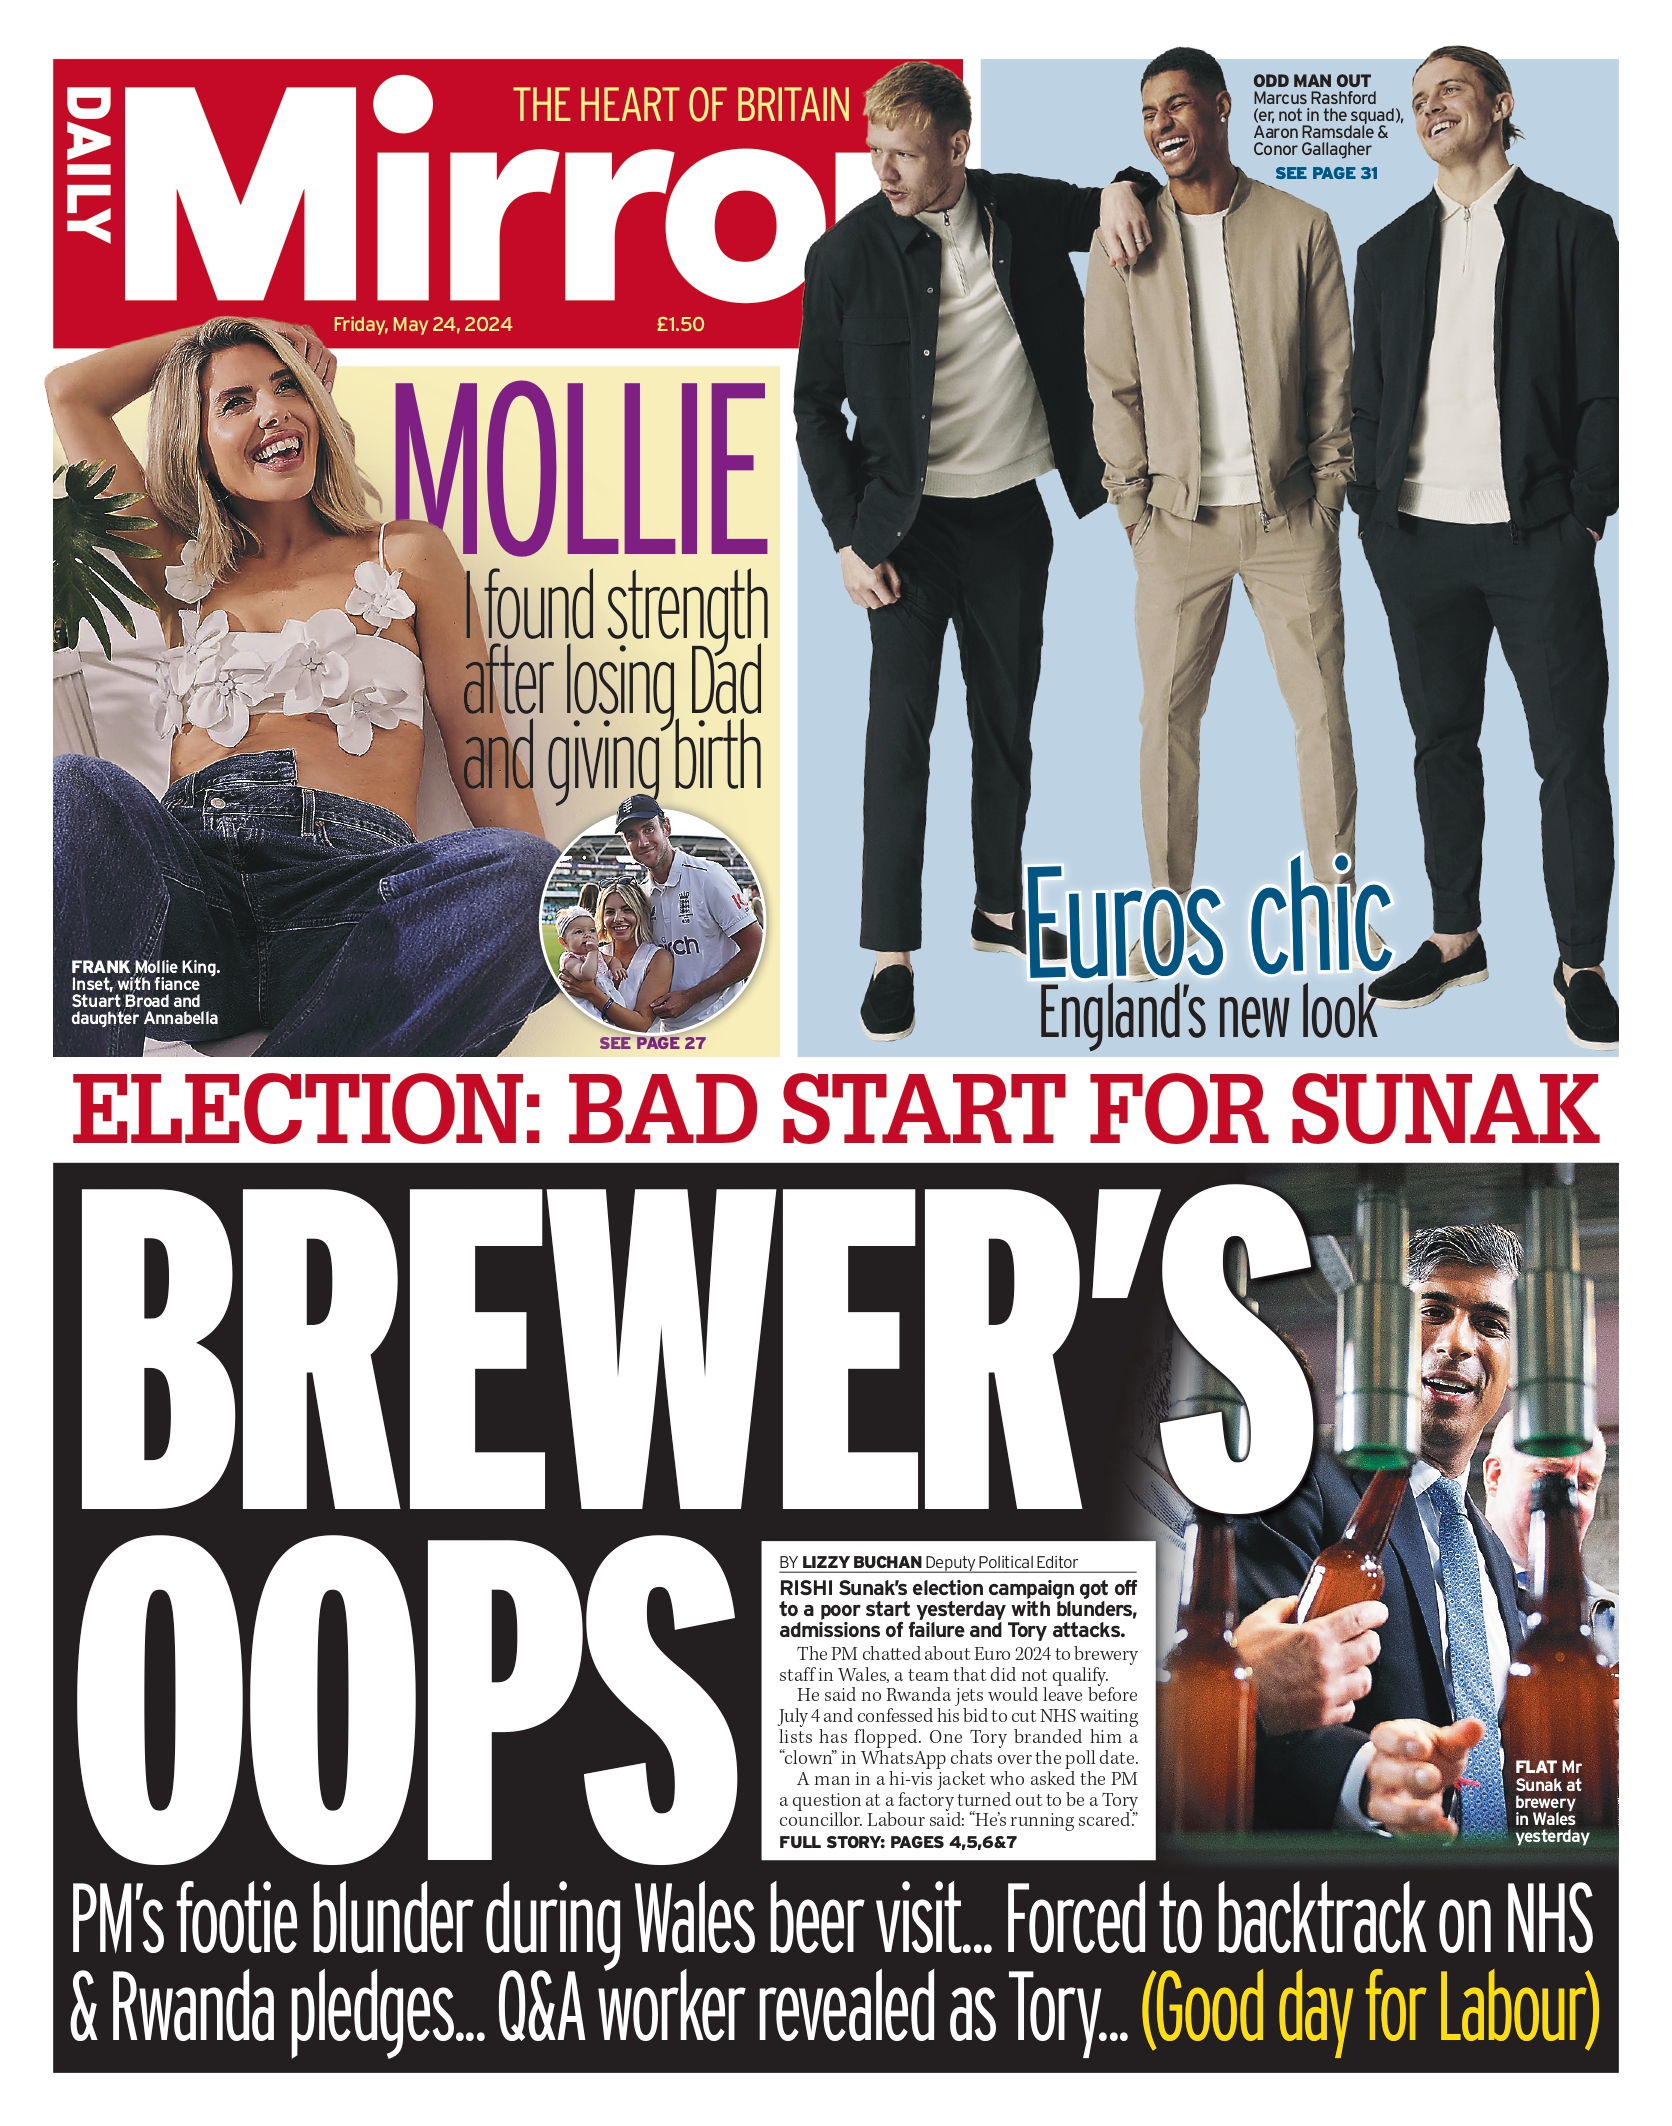 Friday's front page: Brewer's oops https://www.mirror.co.uk/news/politics/rishi-sunaks-election-campaigns-nightmare-32880216 #TomorrowsPapersToday #Sunak #generalelection 